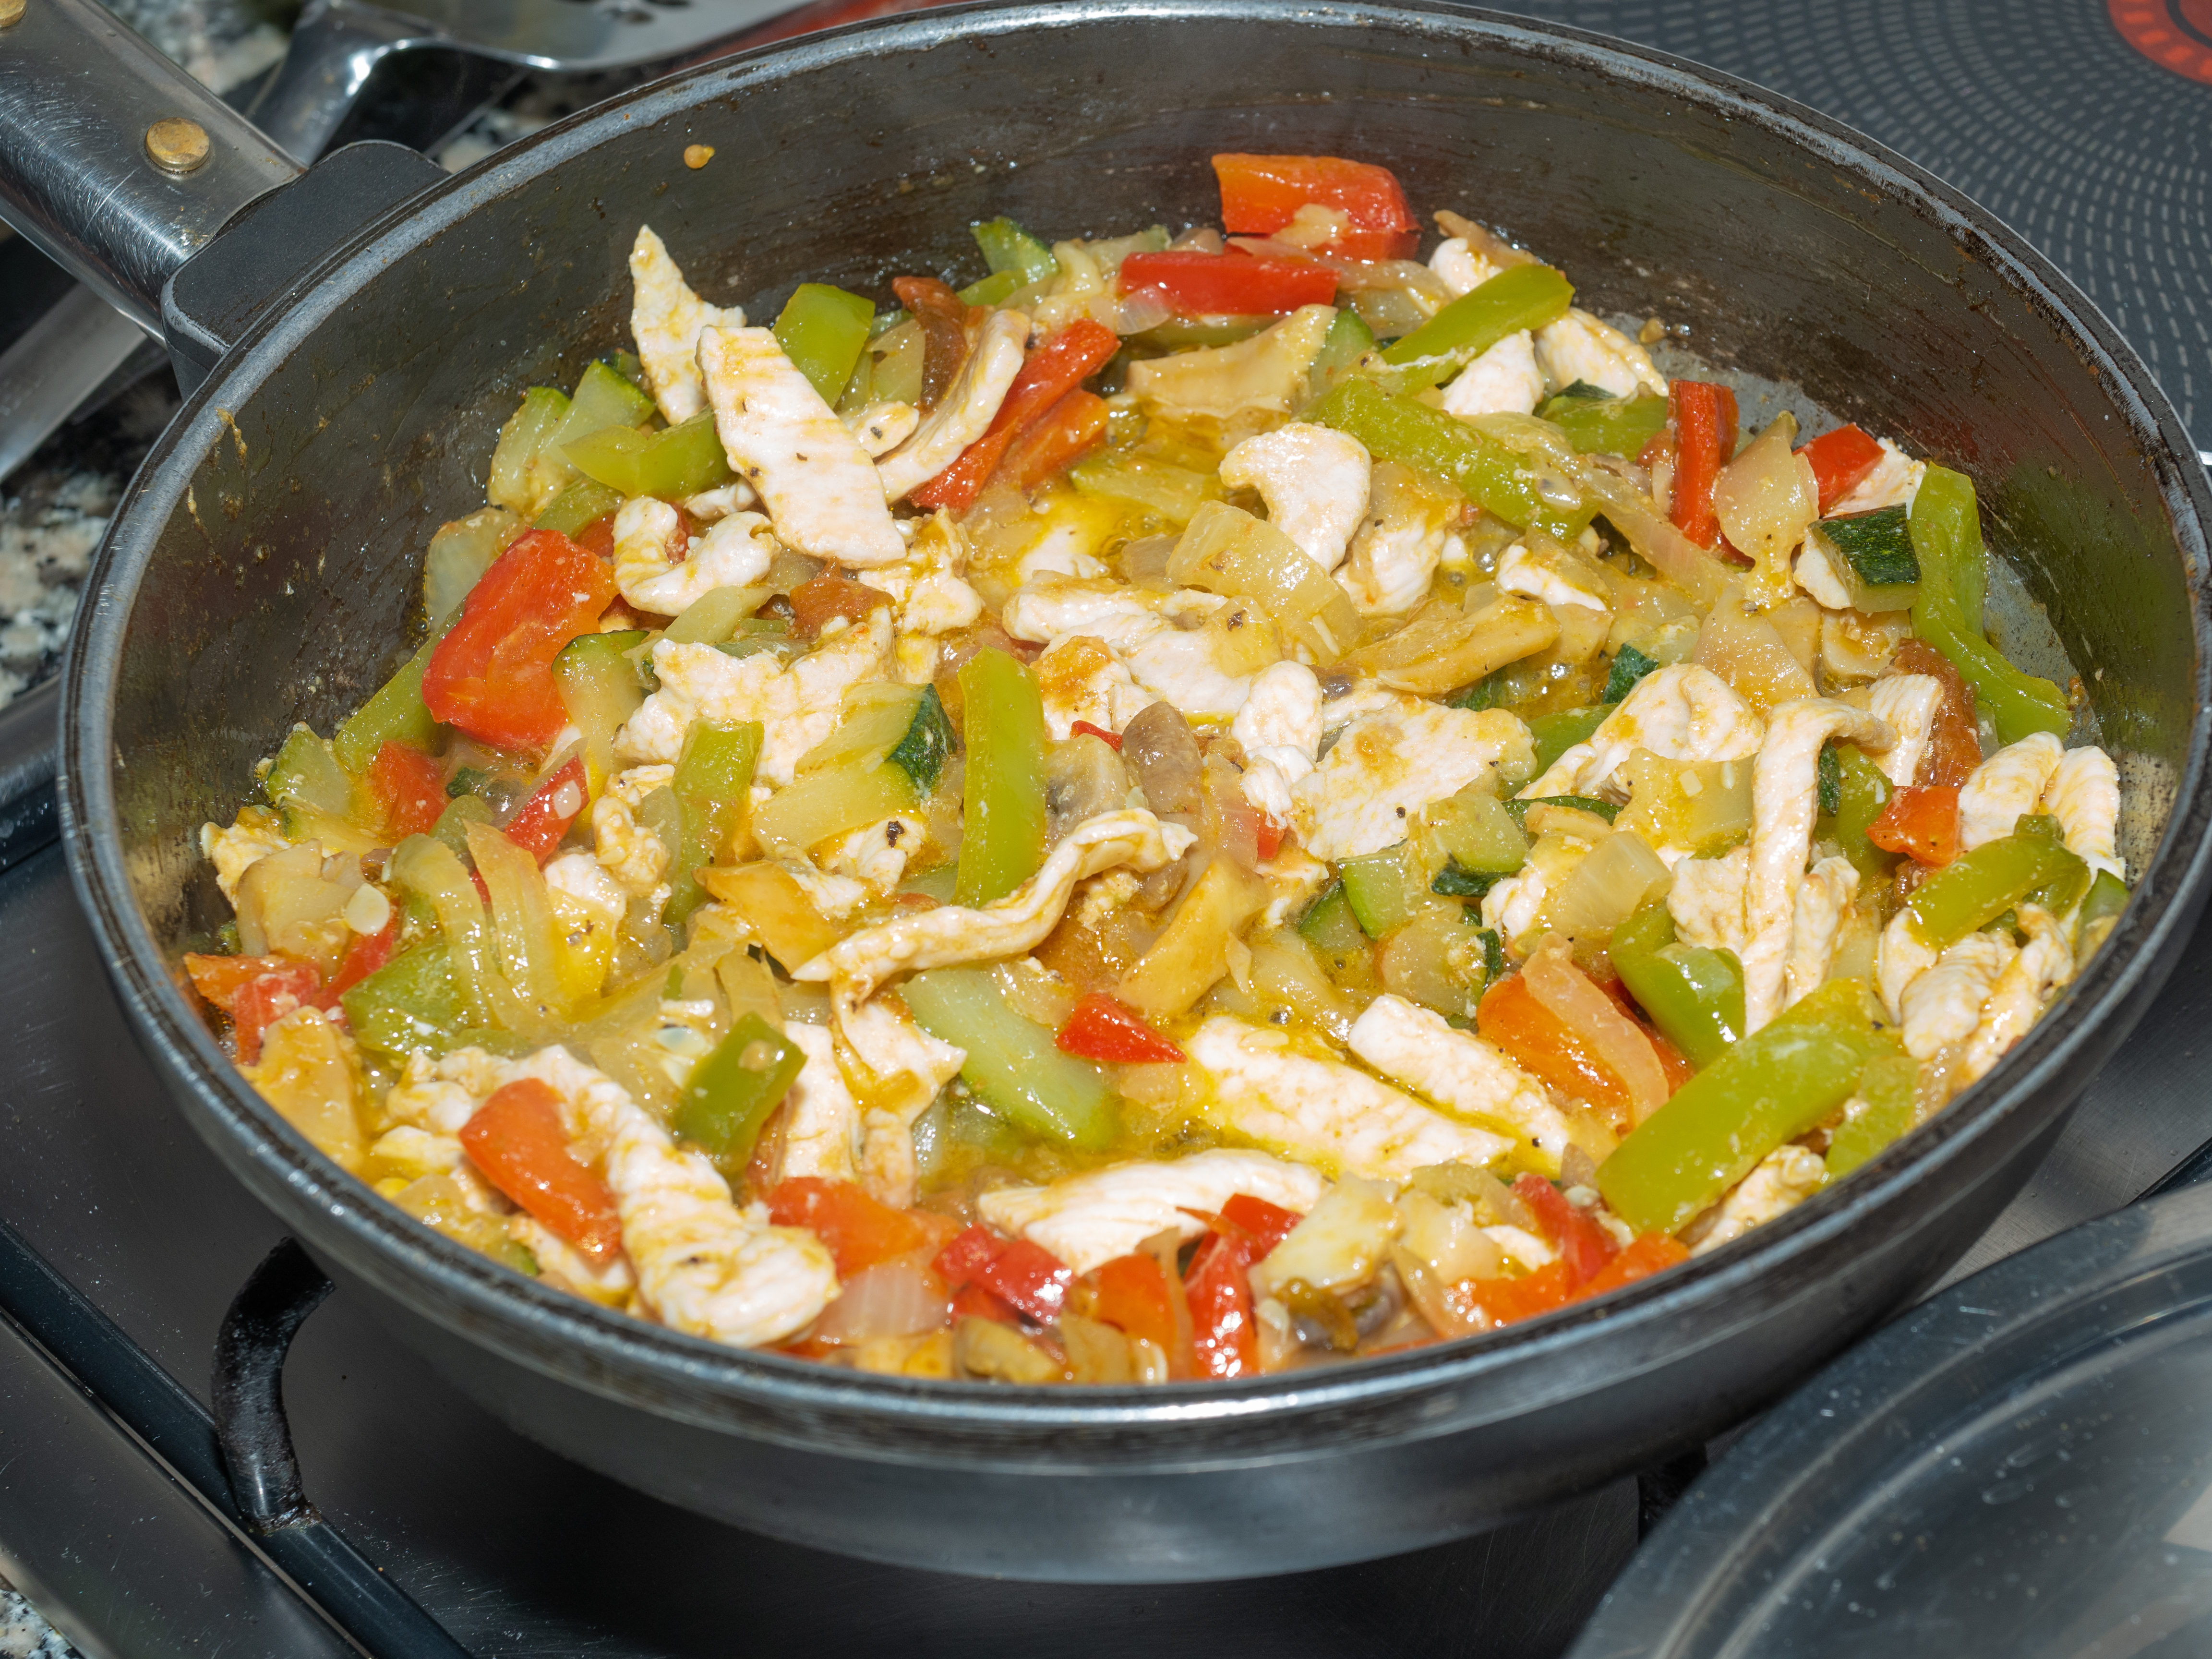 Add your vegetables and let them cook along with your chicken. | Source: Shutterstock